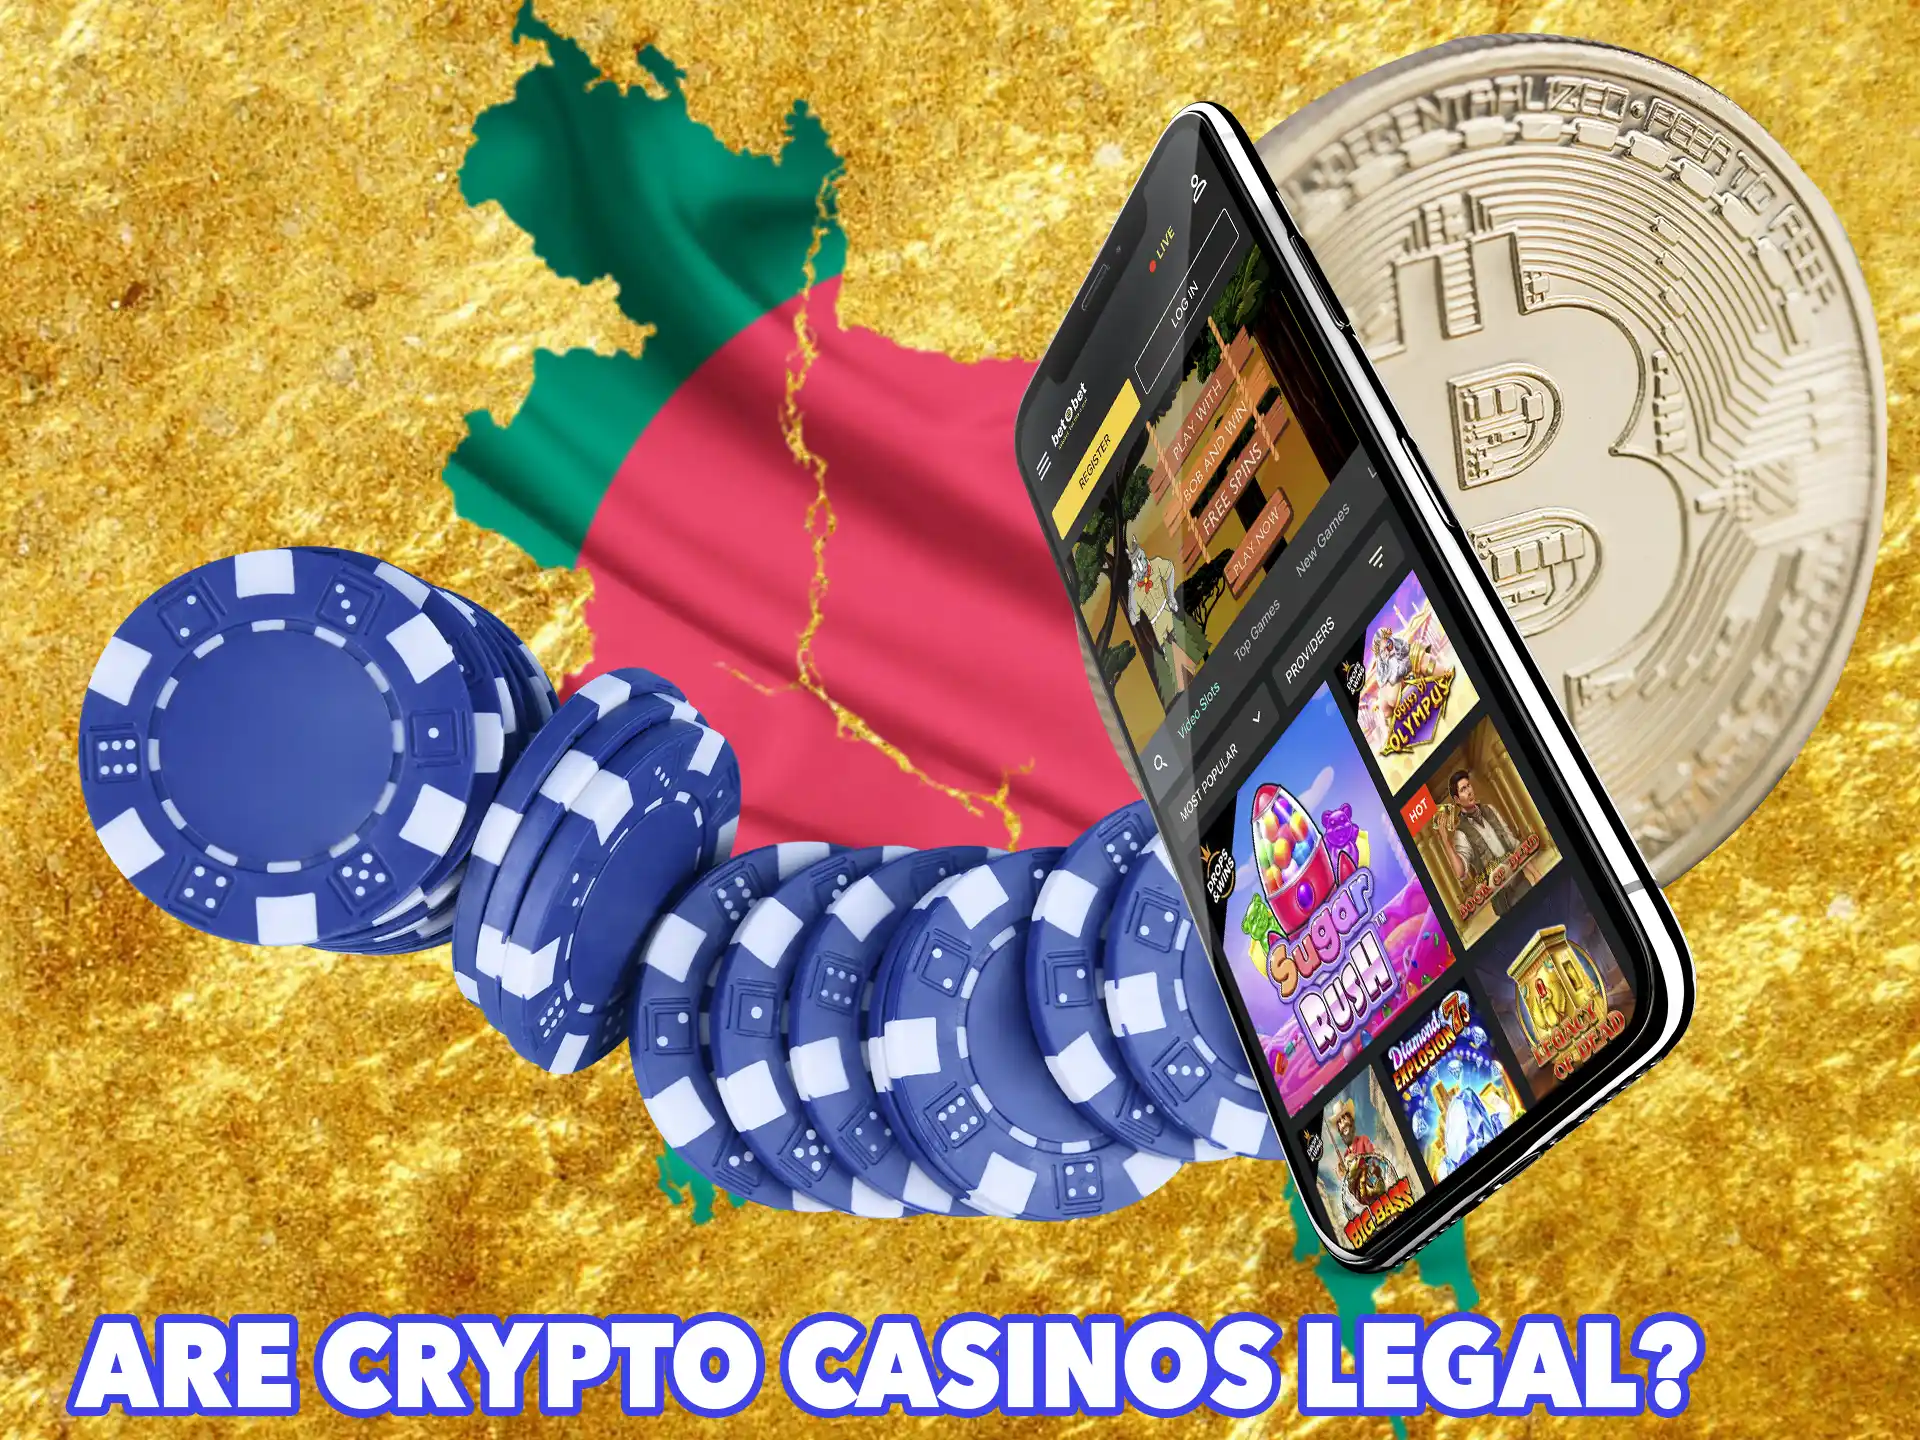 All casinos featured in the review are licensed and not banned in Bnagladesh.